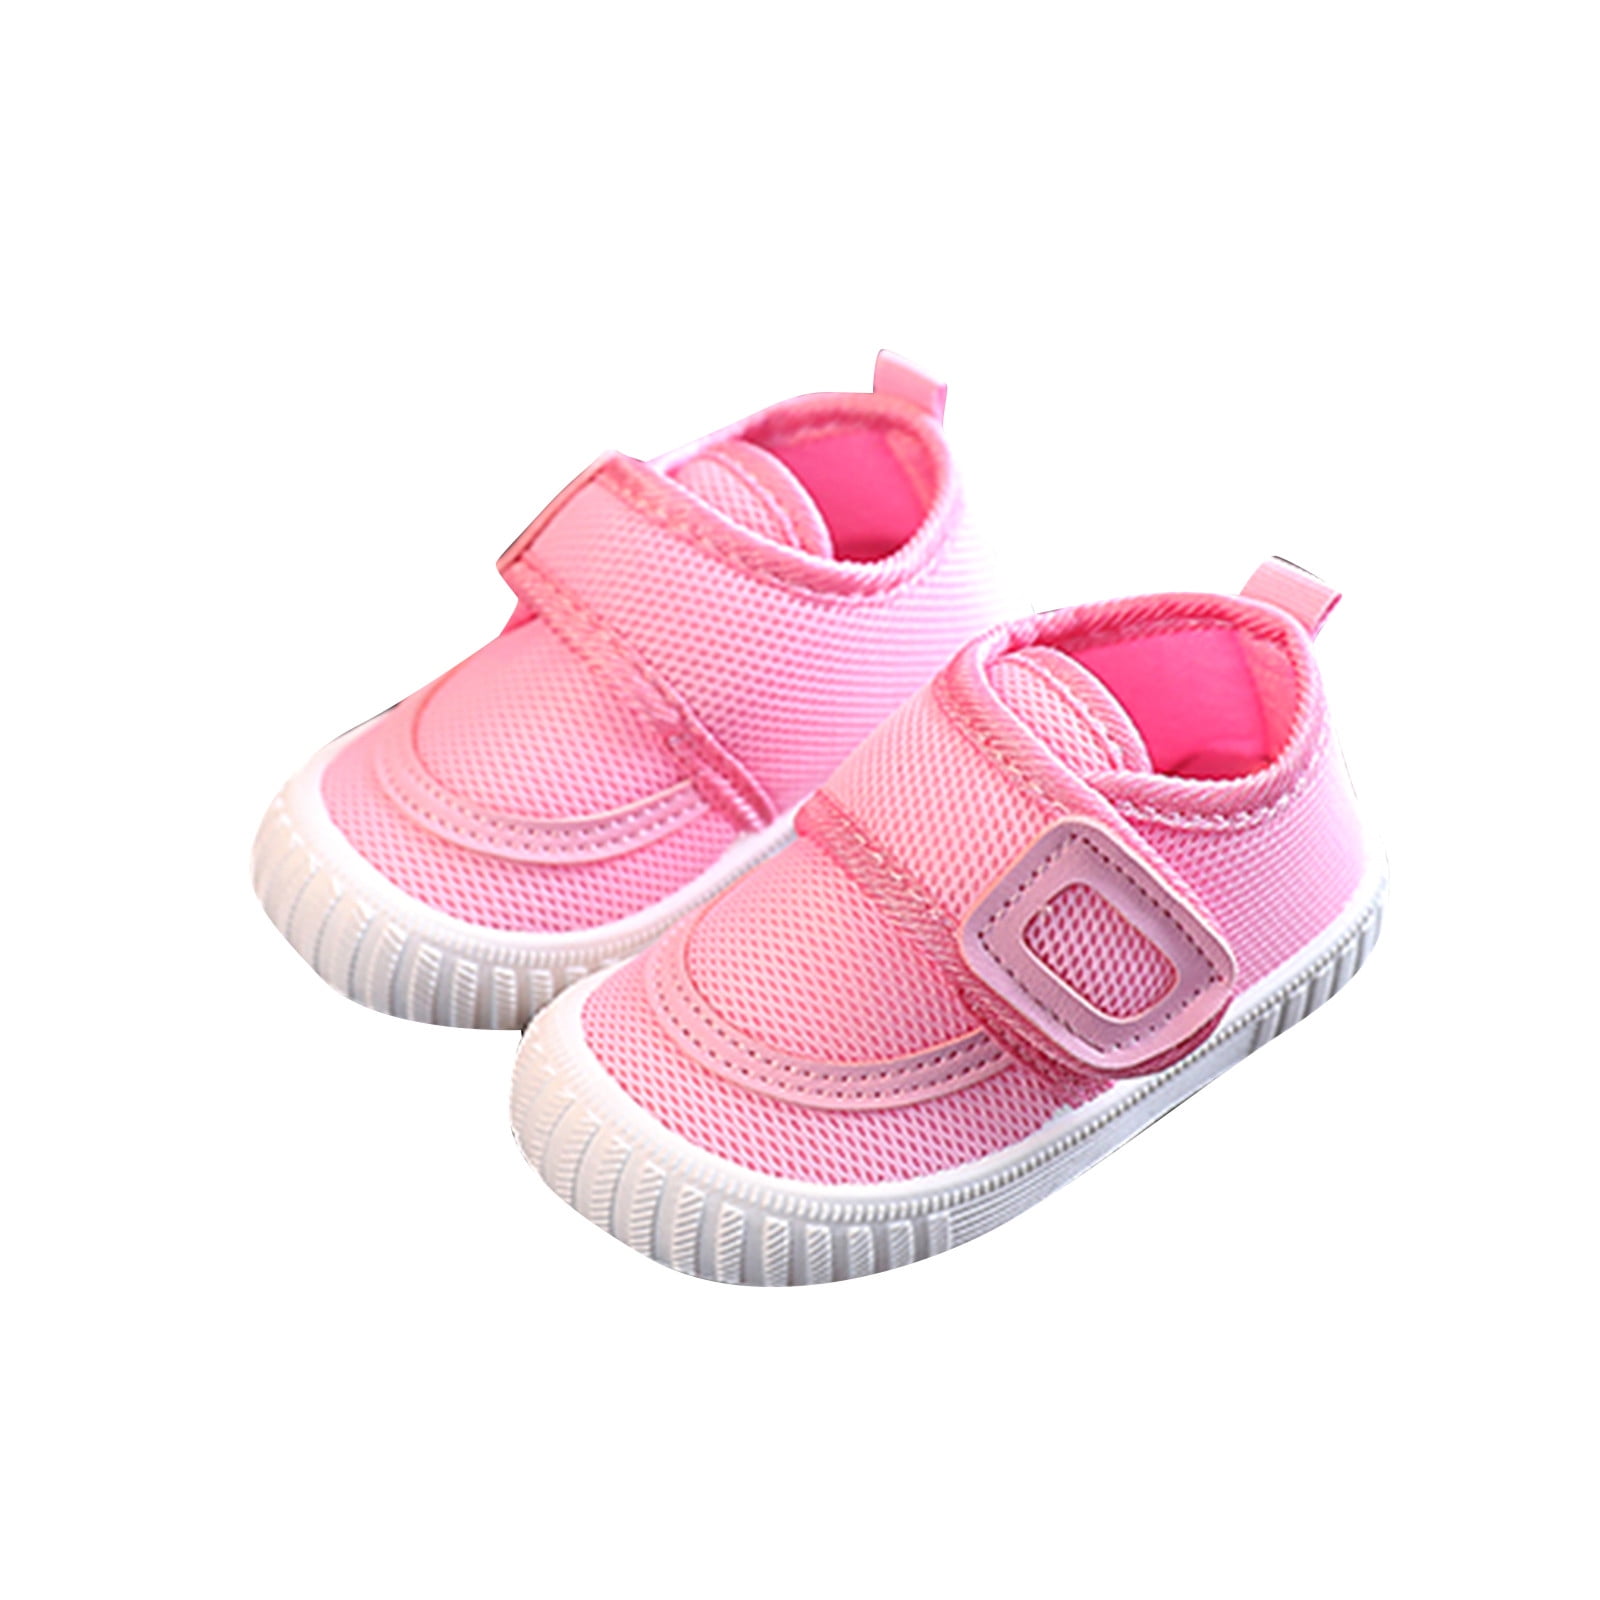 Odeerbi Clearance Girls Sneakers Toddler Infant Baby Girls Boys Soft ...